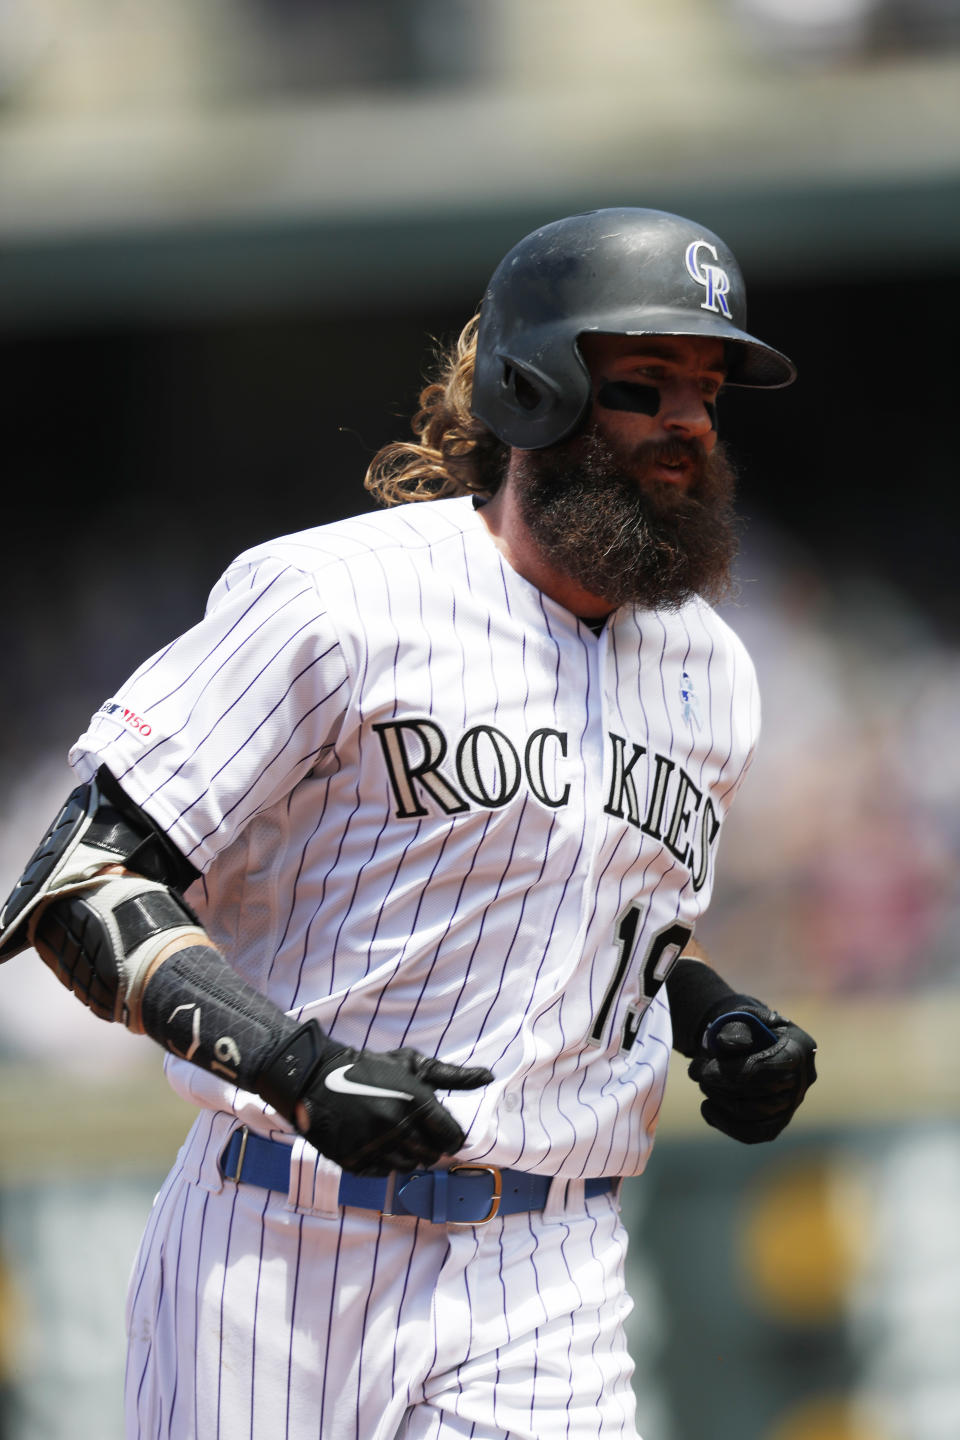 Colorado Rockies' Charlie Blackmon circles the bases after hitting a solo home run off San Diego Padres starting pitcher Nick Margevicius to lead off the bottom of the first inning of a baseball game Sunday, June 16, 2019, in Denver. (AP Photo/David Zalubowski)